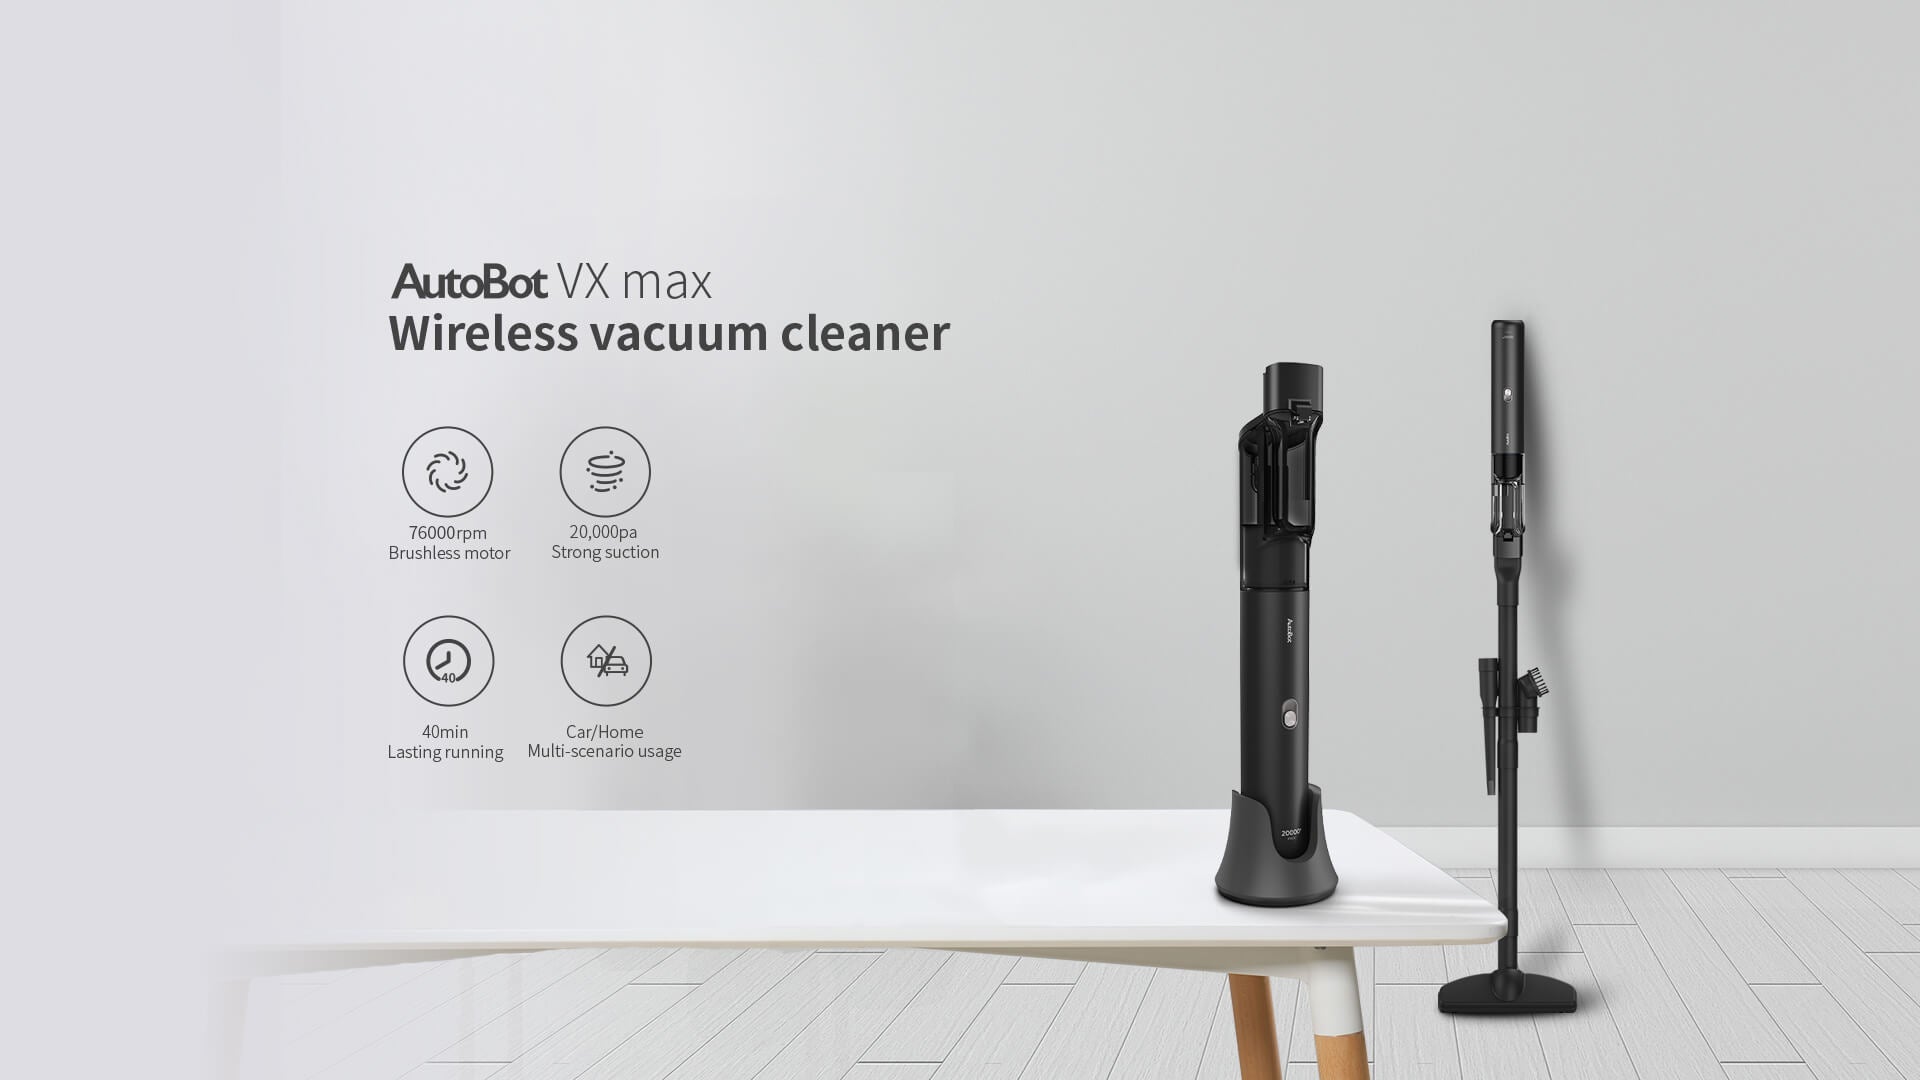 AutoBot VX max wireless vacuum cleaner, 10000rpm Brushless motor, 20000pa Strong suction,40min lasting running,Car and home multi-scenario usage